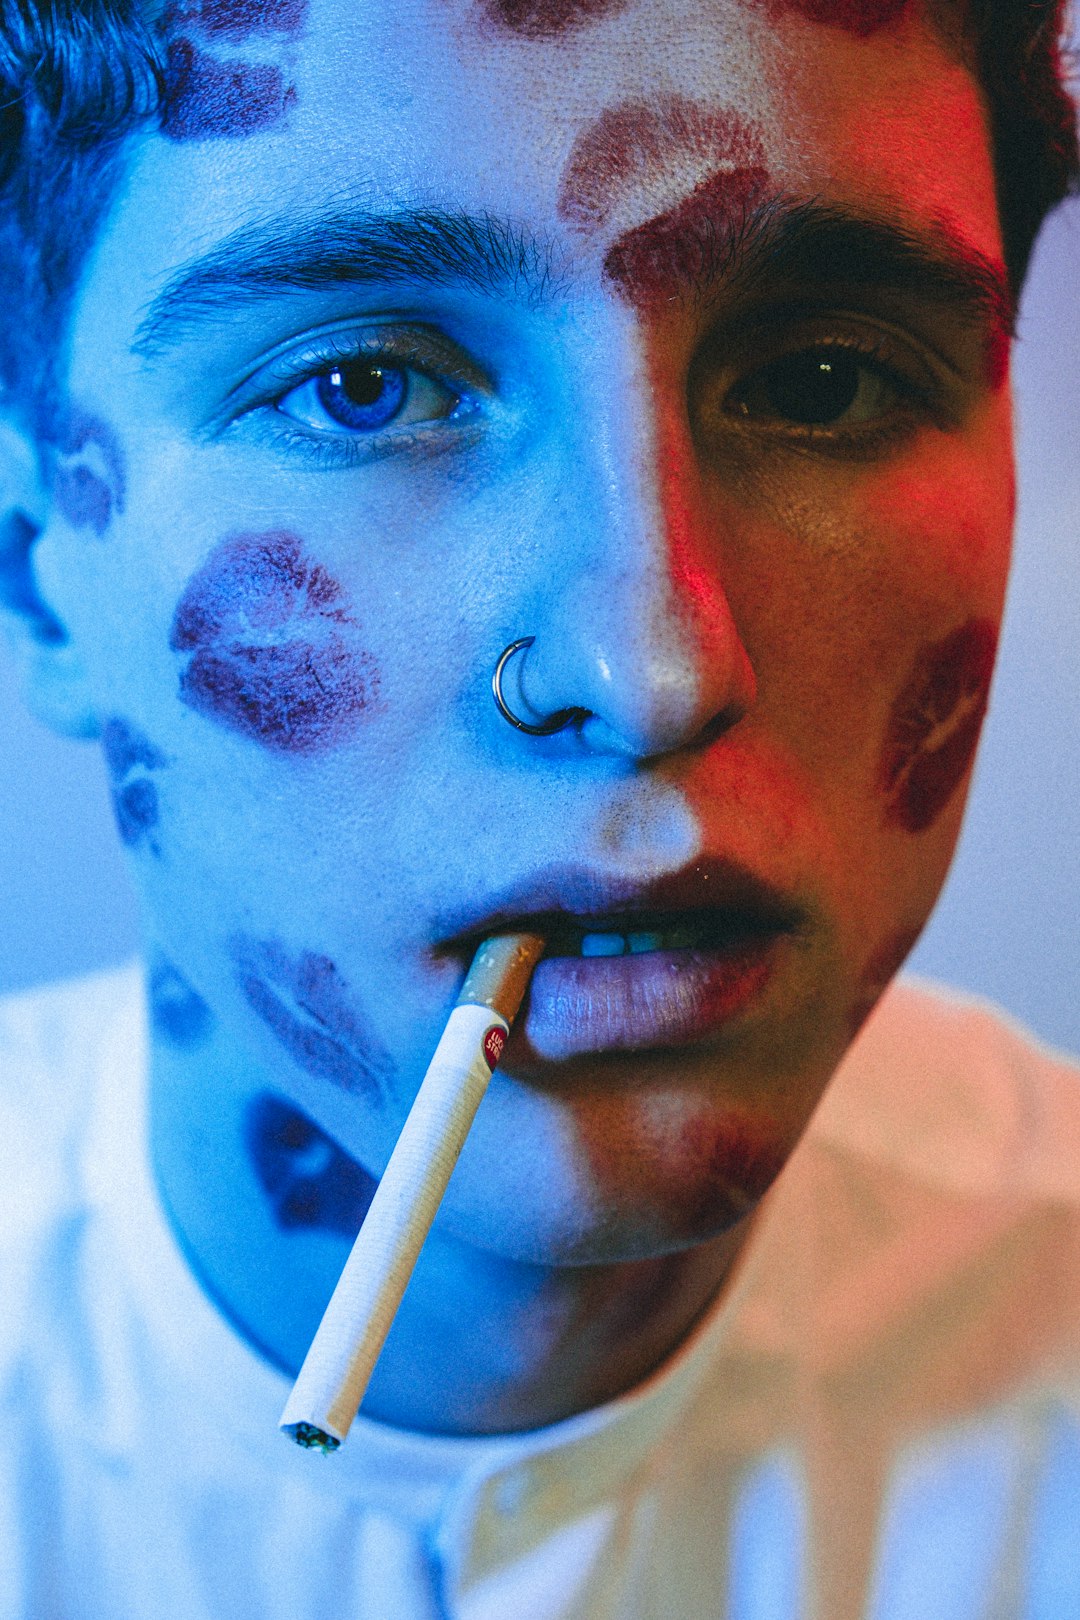 man in white crew neck shirt with blue and white paint on face